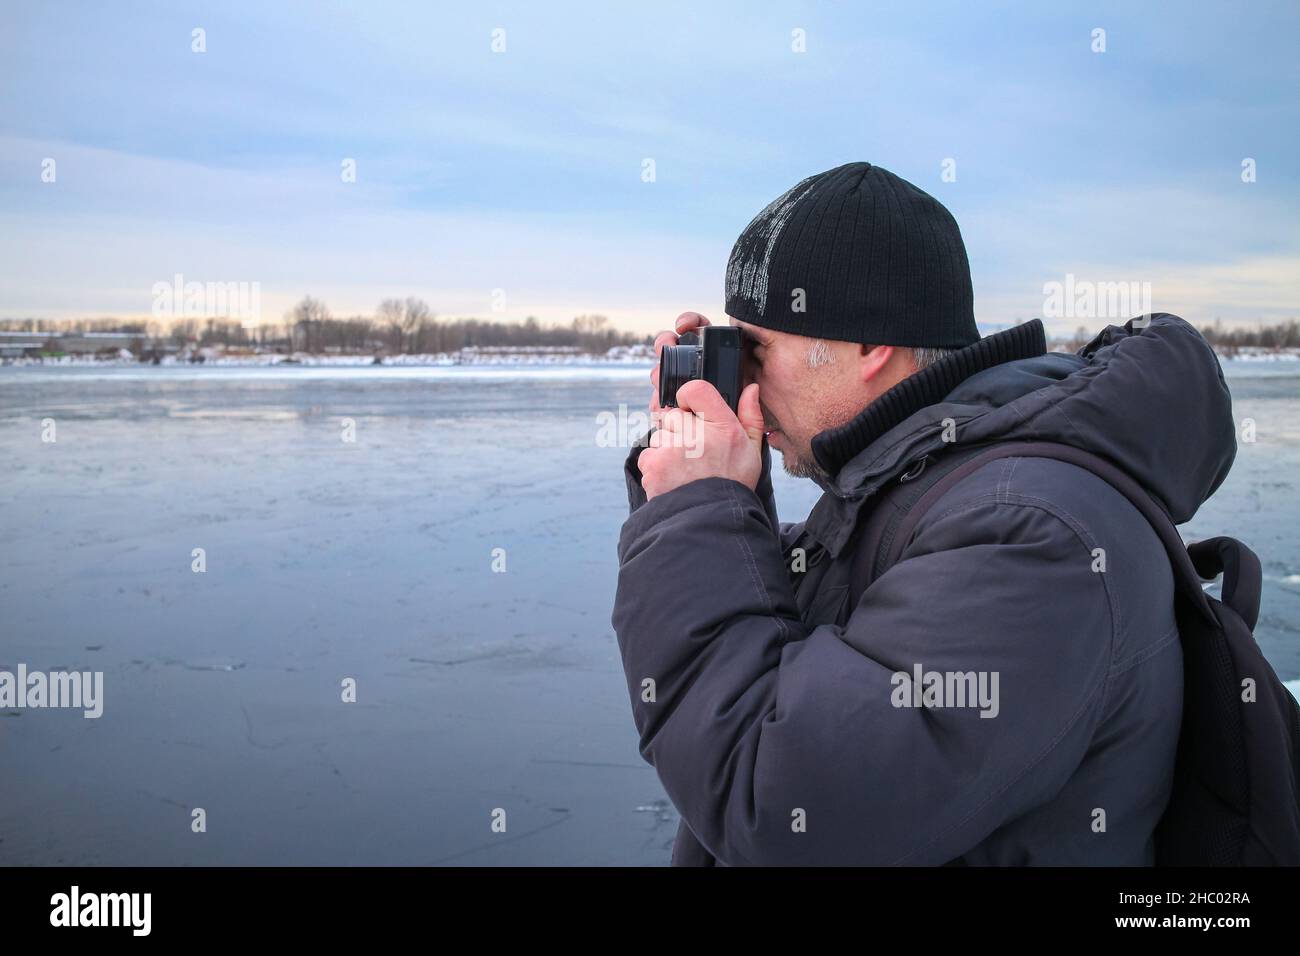 A man takes pictures with a film camera in winter in cold weather. The photographer looks into the viewfinder of the camera to photograph the winter l Stock Photo